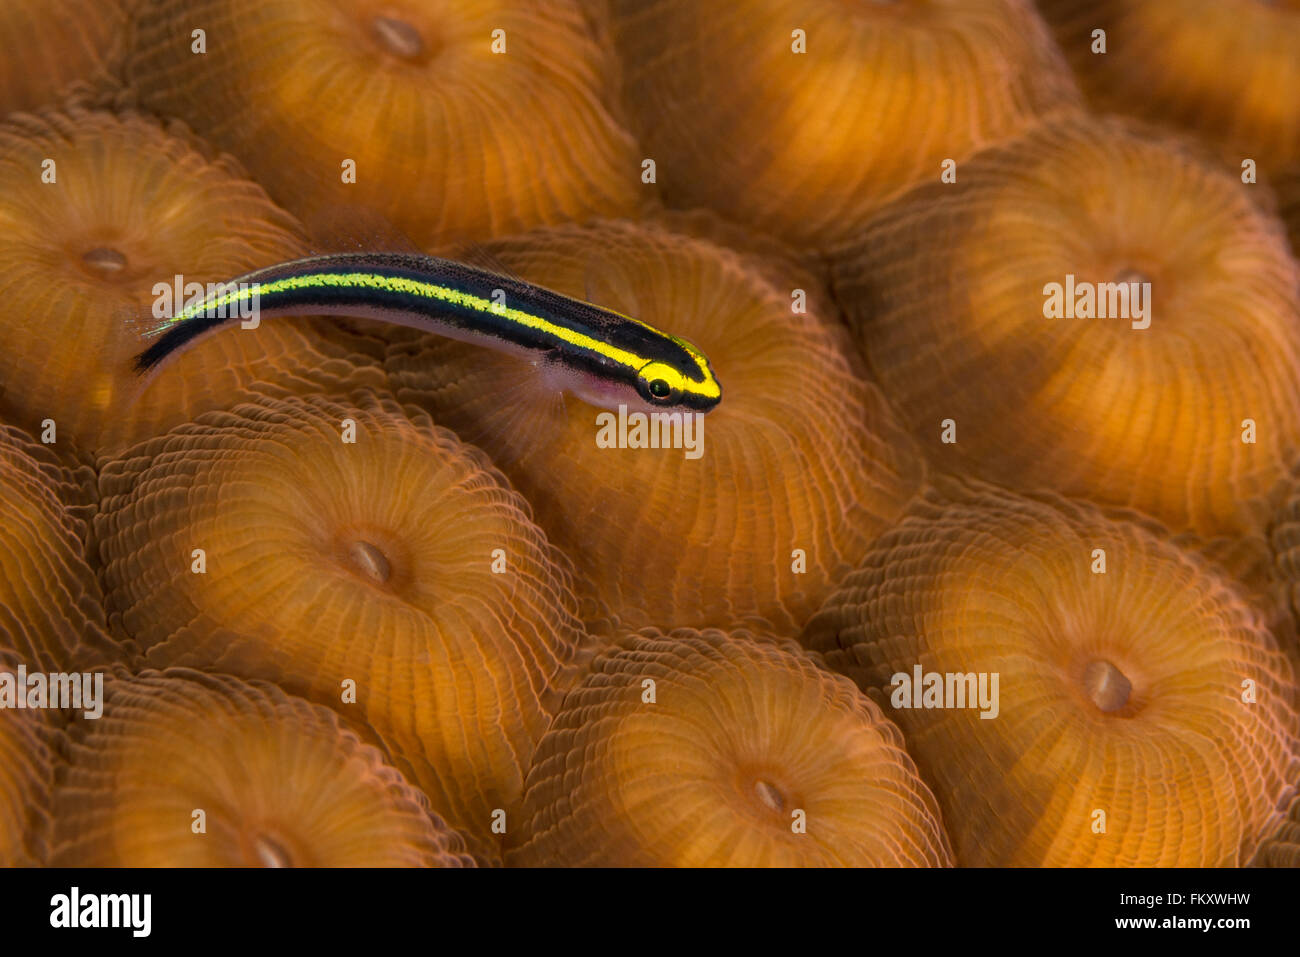 Yellow variety of sharknose goby on star coral. Bahamas, December Stock Photo